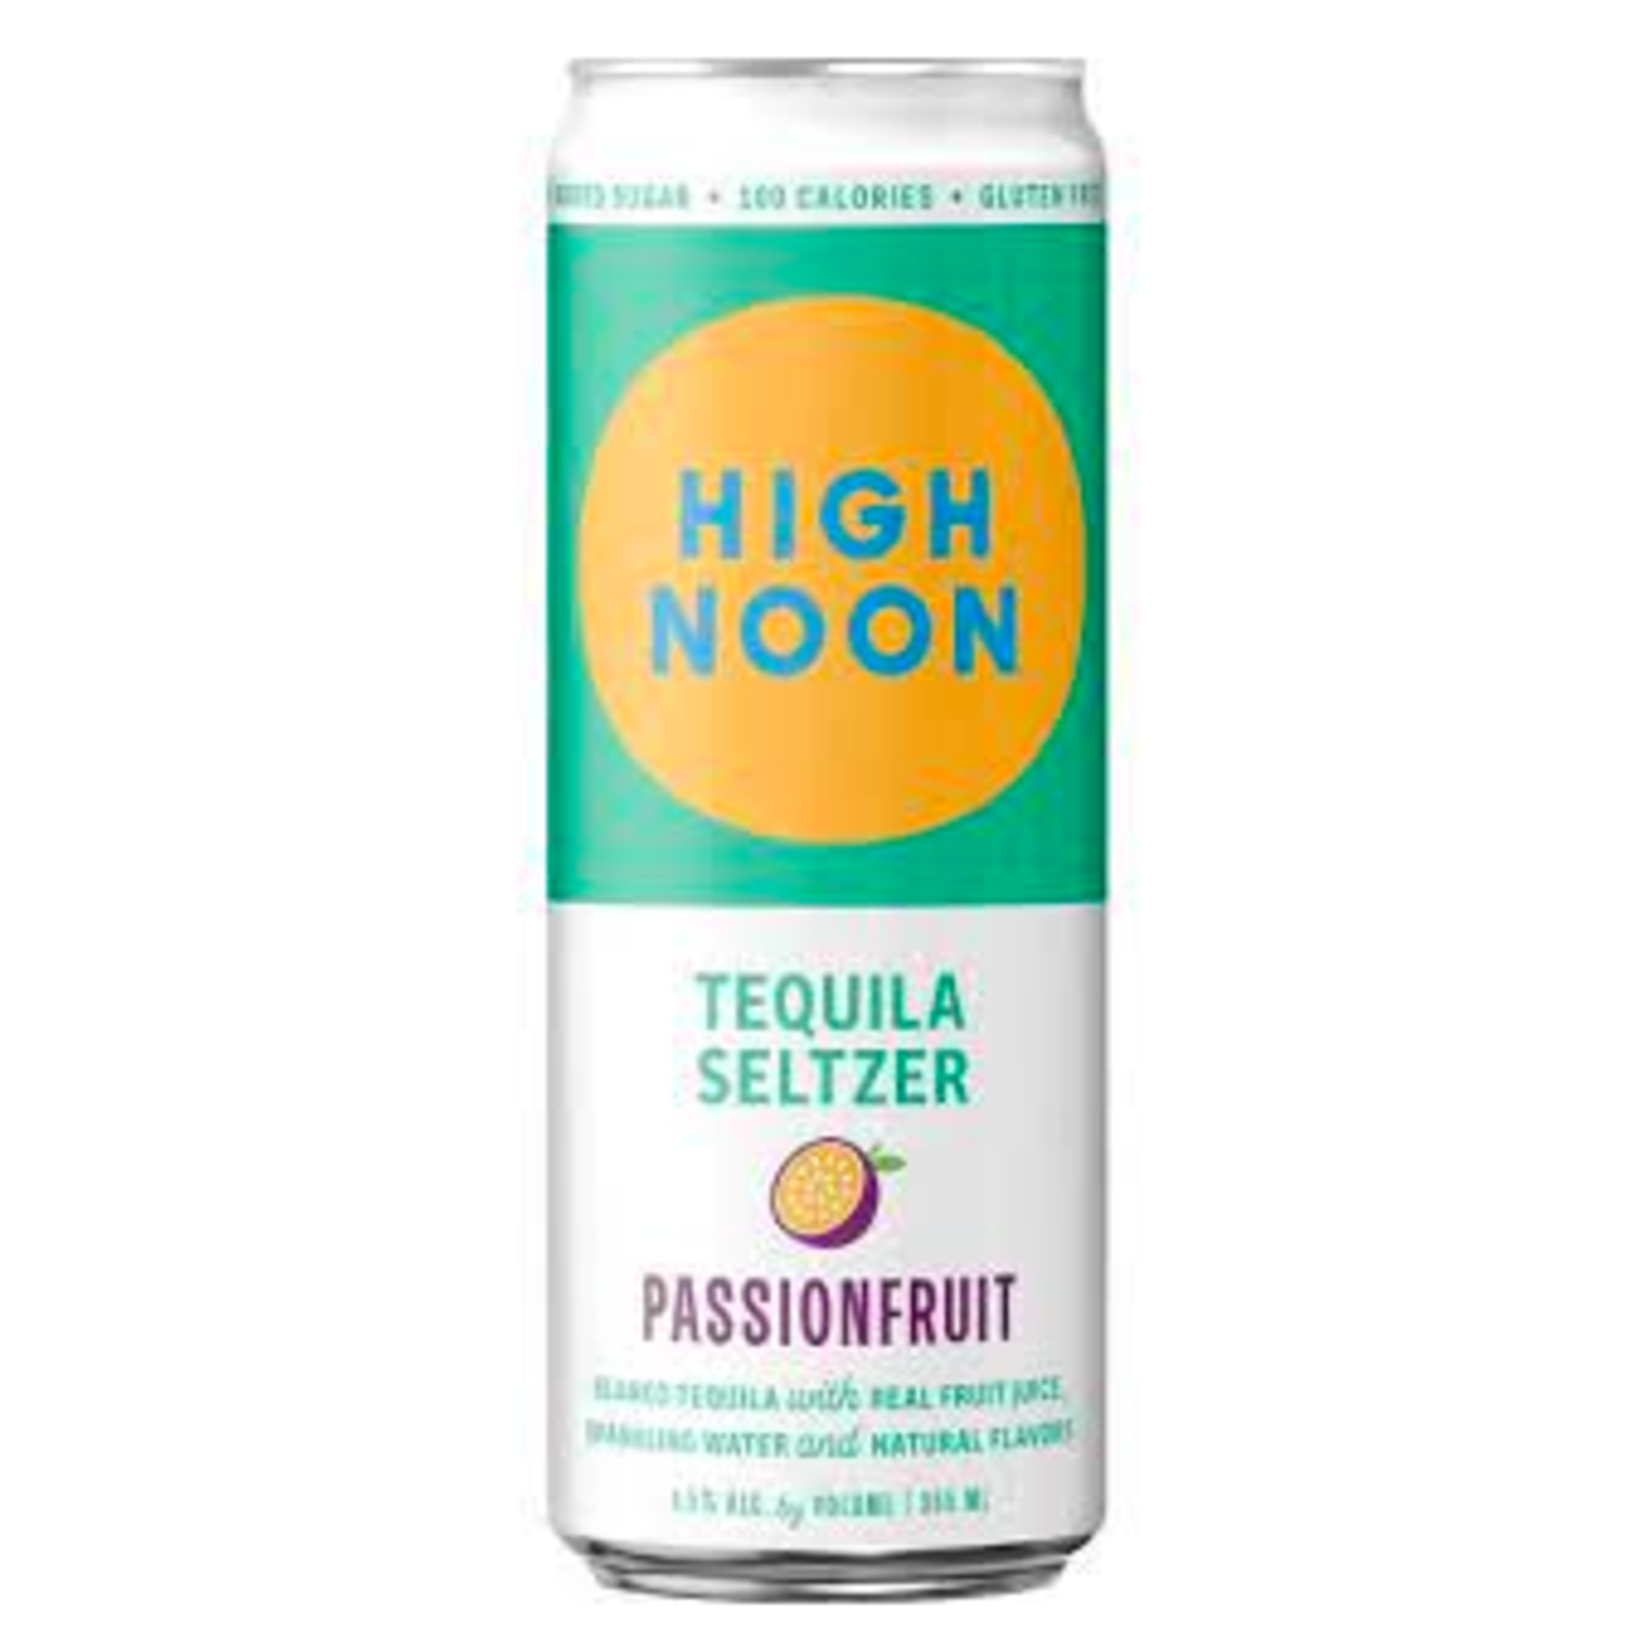 High Noon, Passionfruit Tequila Seltzer